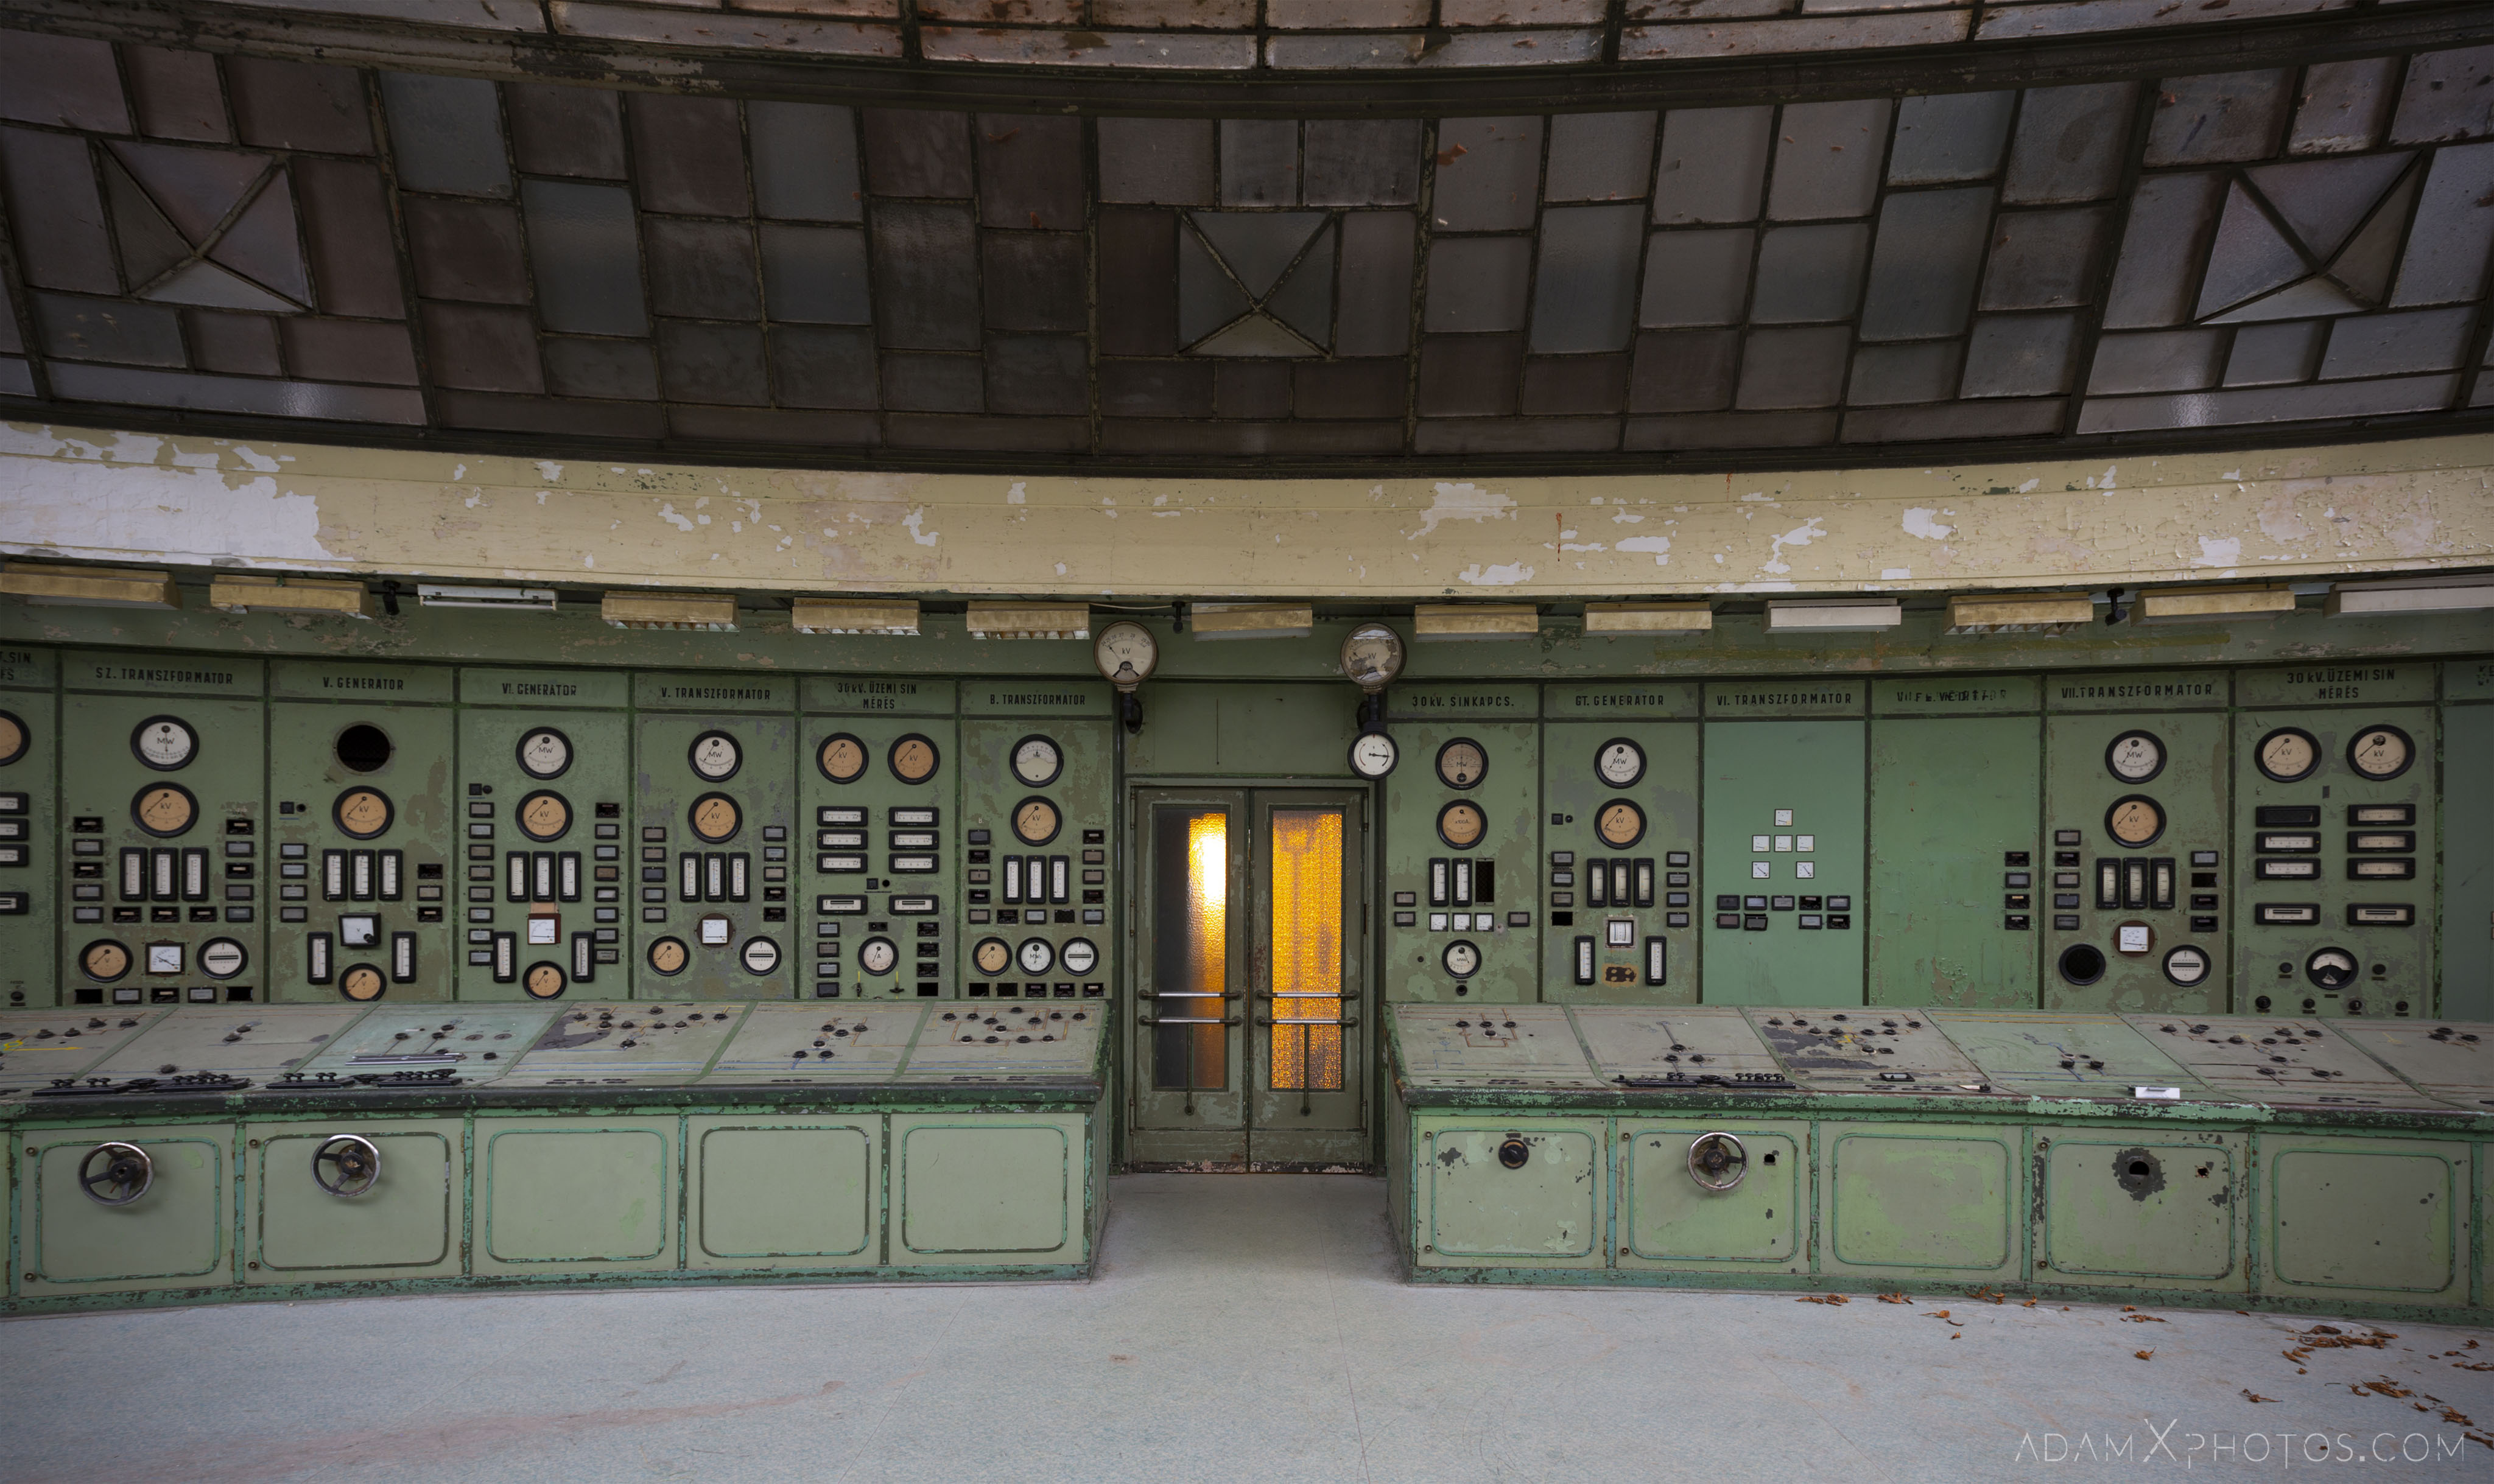 Kelenföld Control Room Art Deco Power Station Green controls panels switches udapest hungary Adam X Urbex Urban Exploration Access 2018 Abandoned decay ruins lost forgotten derelict location creepy haunting eerie